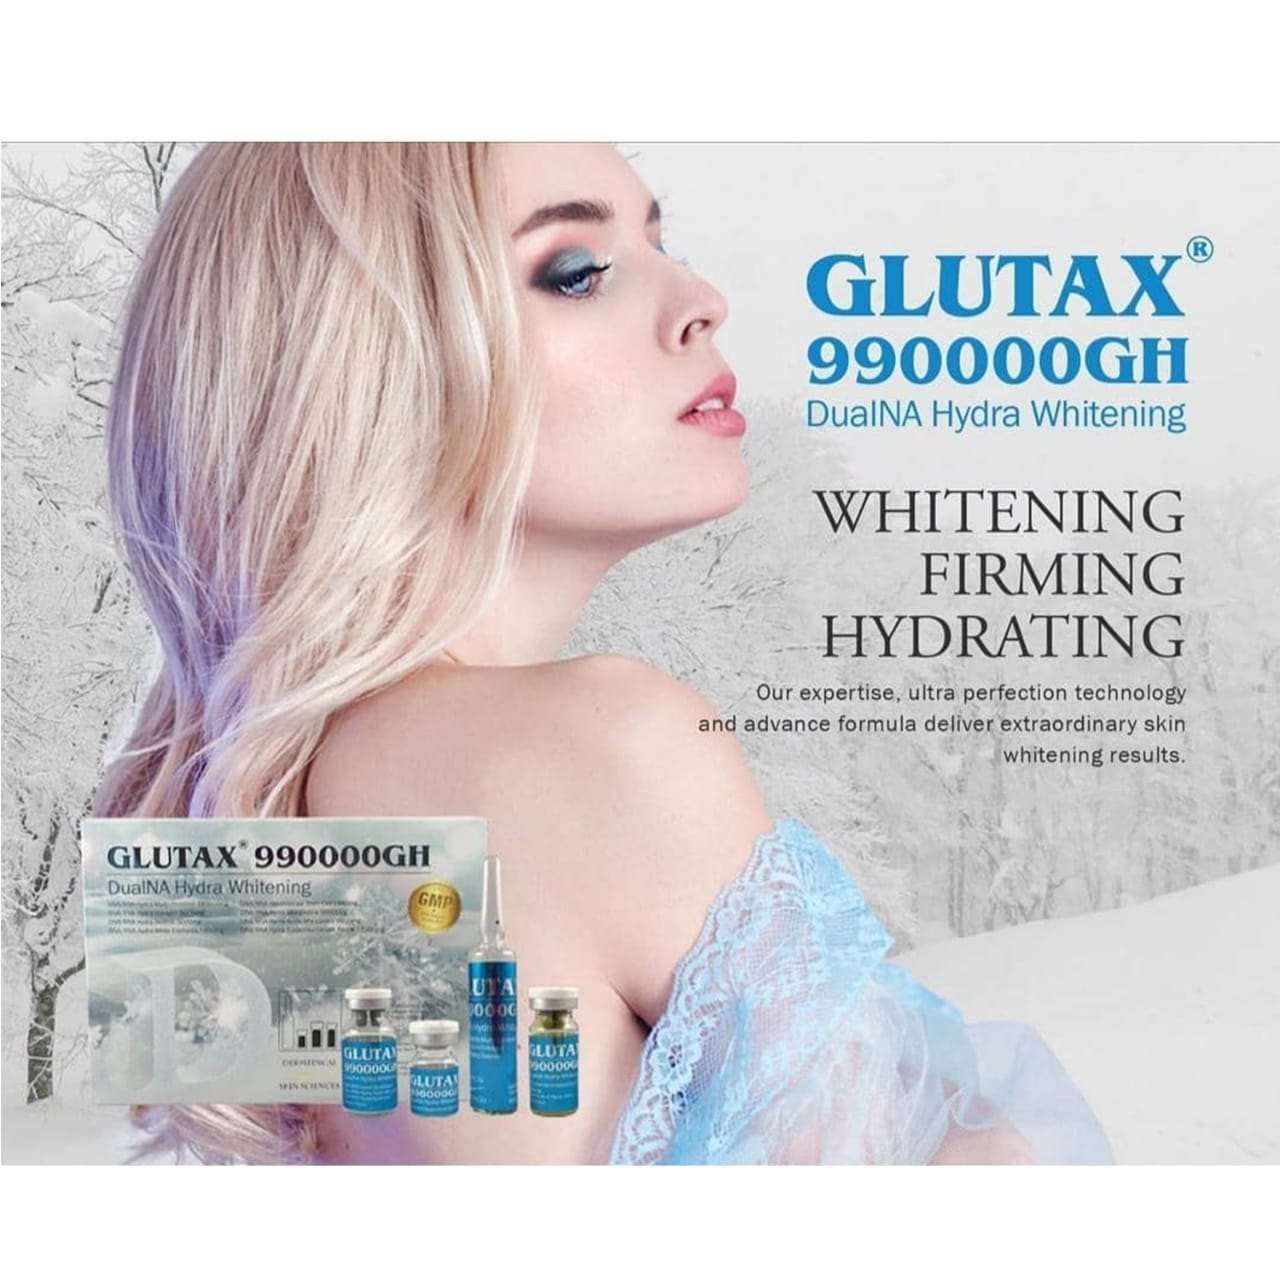 Glutax 990000gh Dual Hydra Whitening Injection